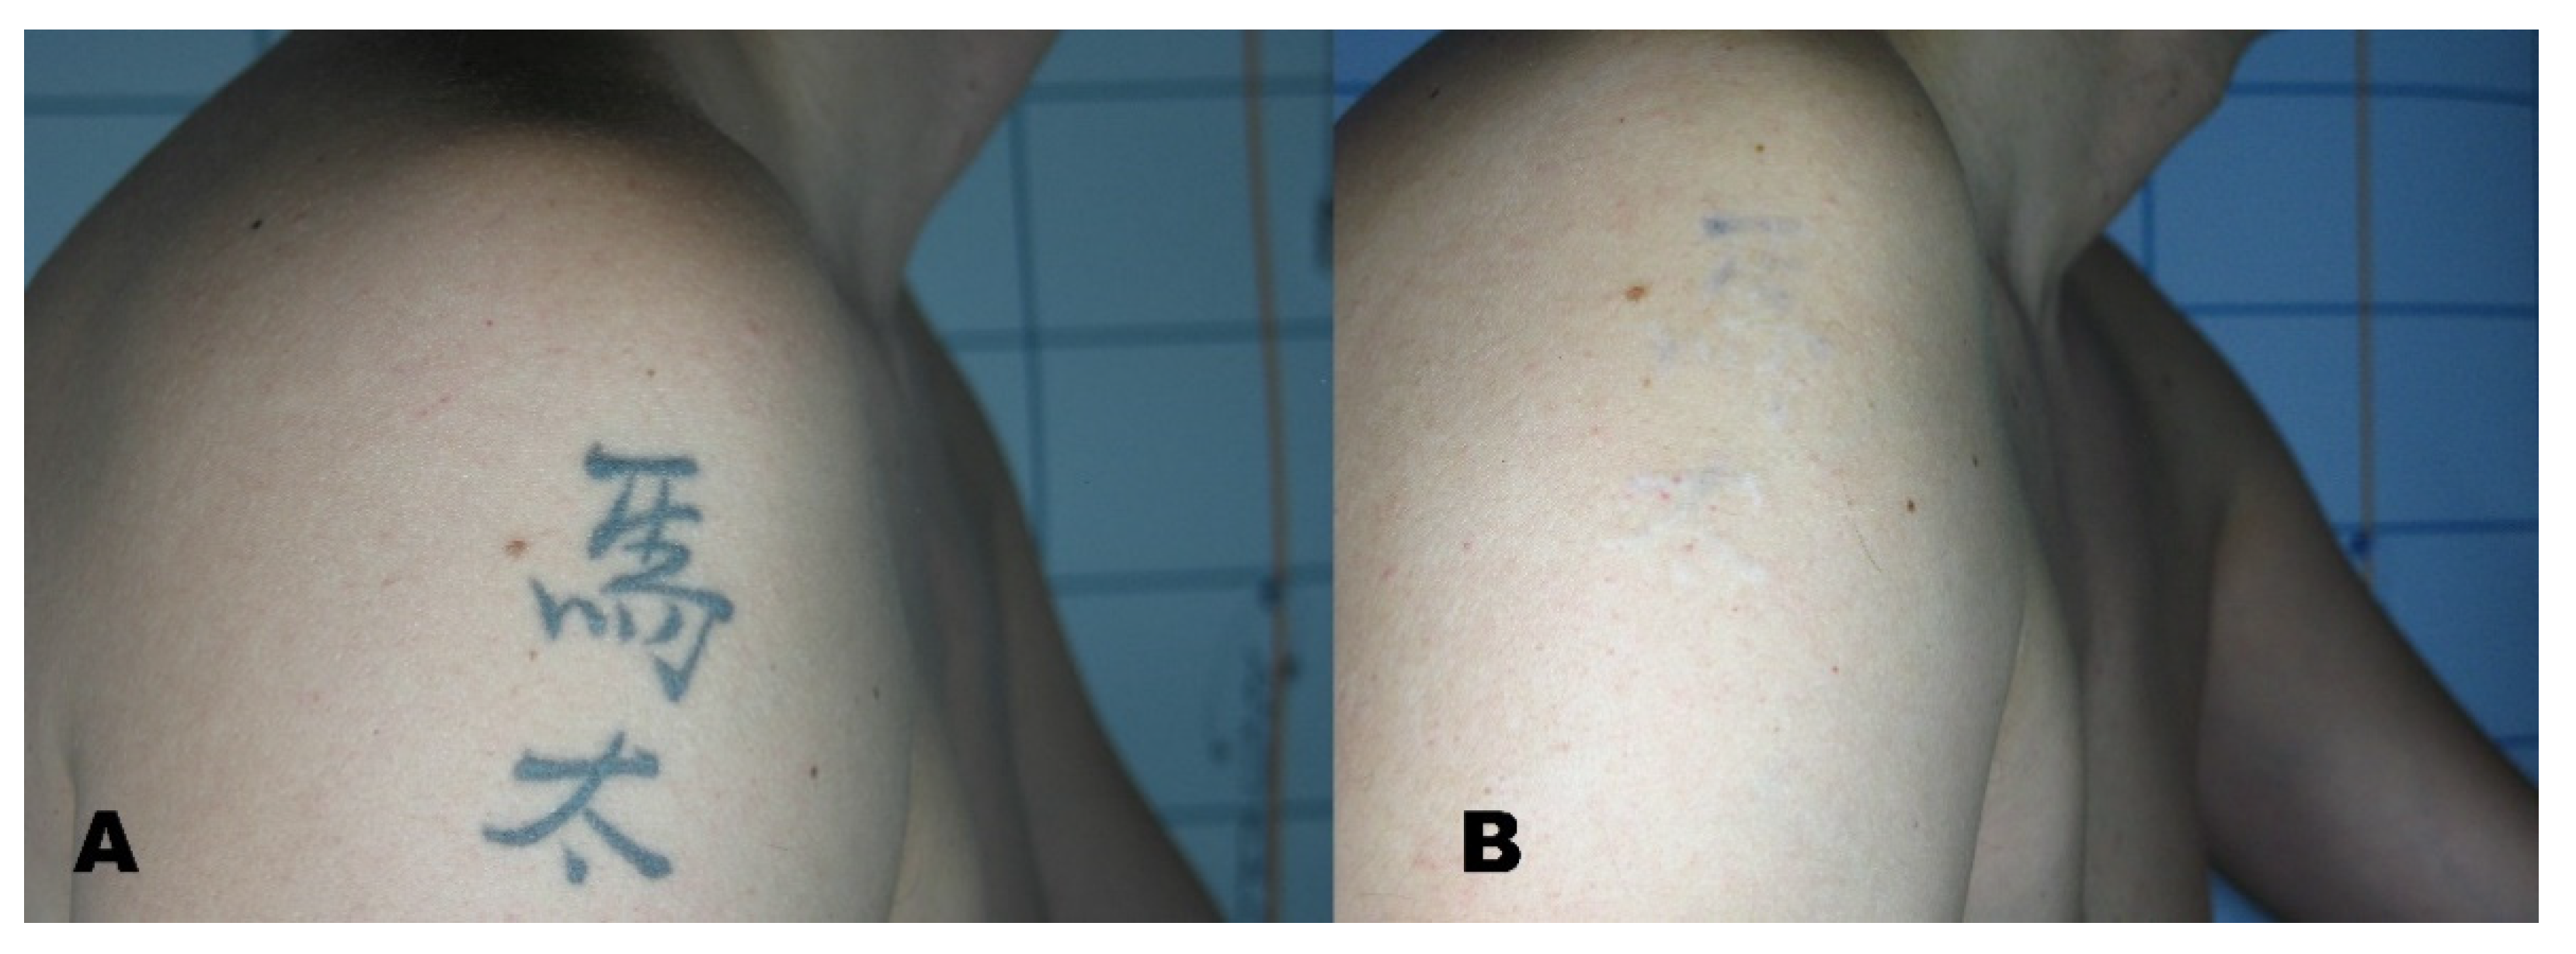 Laser Tattoo Removal  Conditions  Treatments  UCSF Health